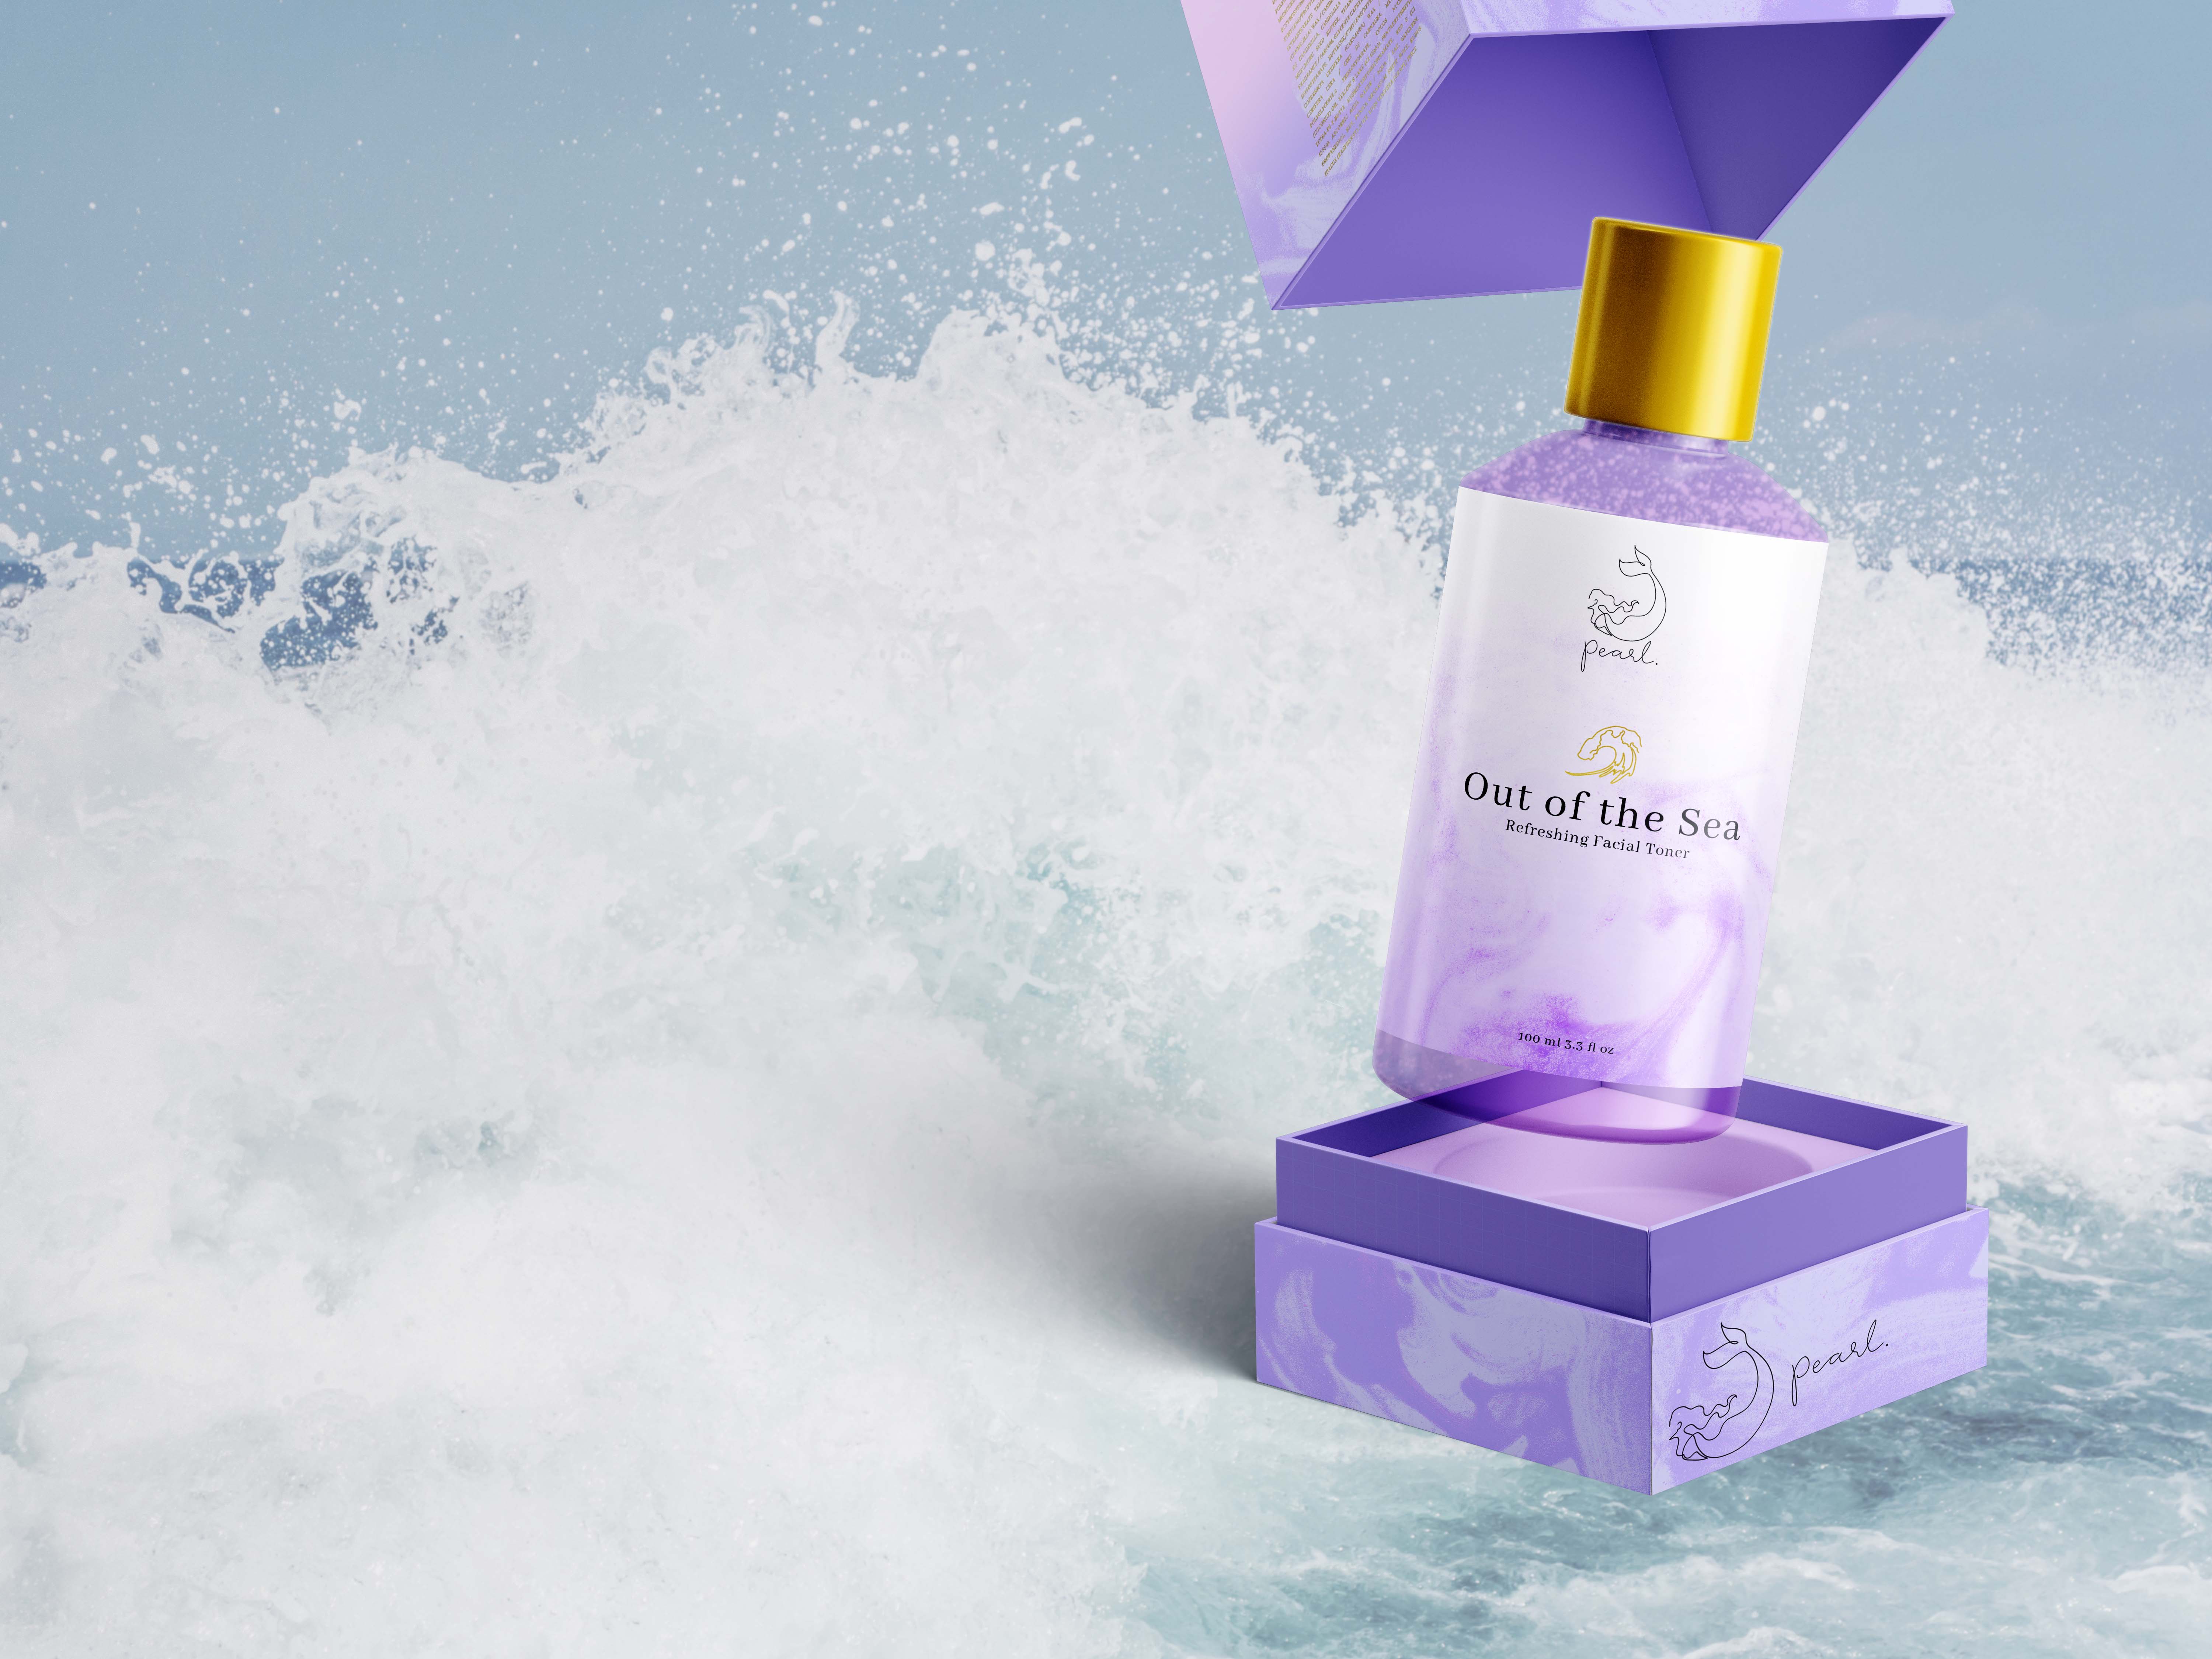 Out of the Sea Refreshing Facial Toner is step 2 of the skincare collection 'The World is Your Oyster' by pearl. With hyaluronic acid acting as a key ingredient, Out of the Sea retains the moisture in your skin and acts as a barrier from harsh conditions. Gently apply the toner on your face after cleansing to lock in moisture.